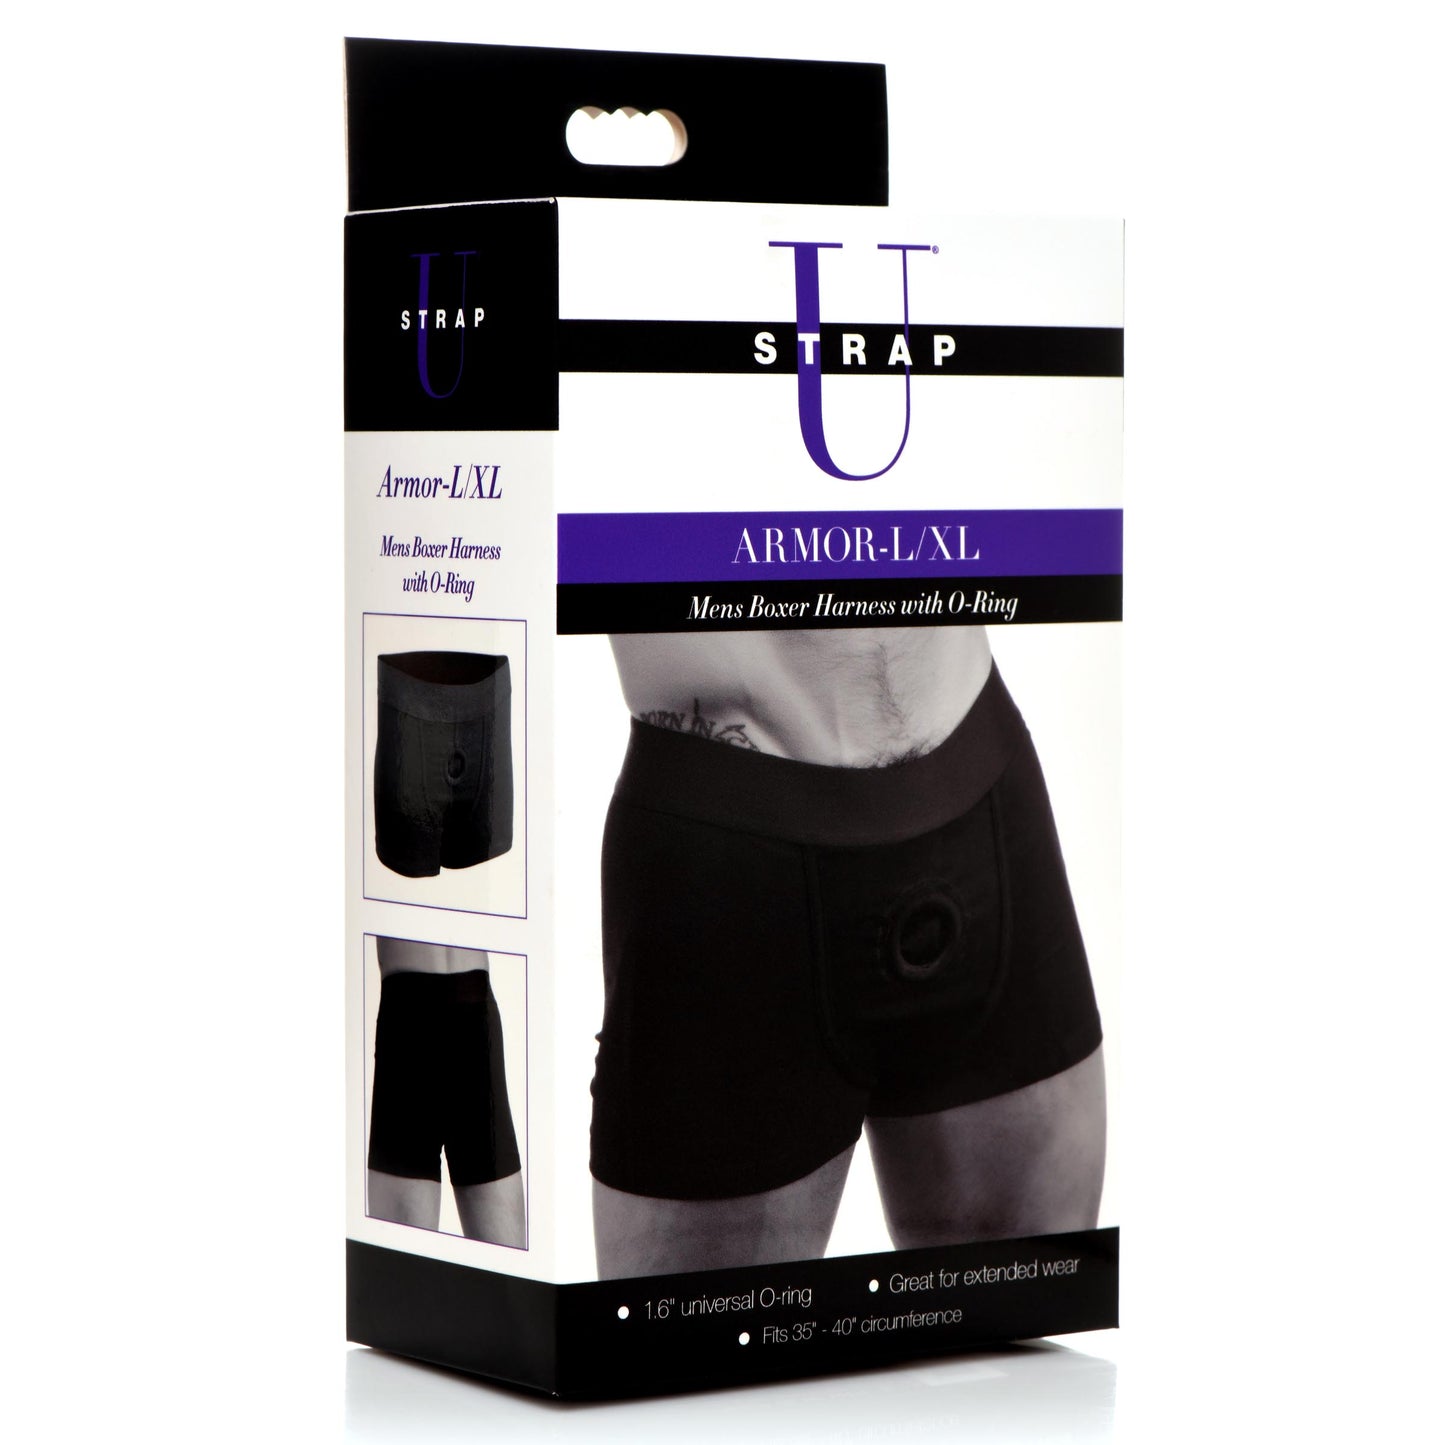 Armor Mens Boxer Harness With O-ring - Lxl